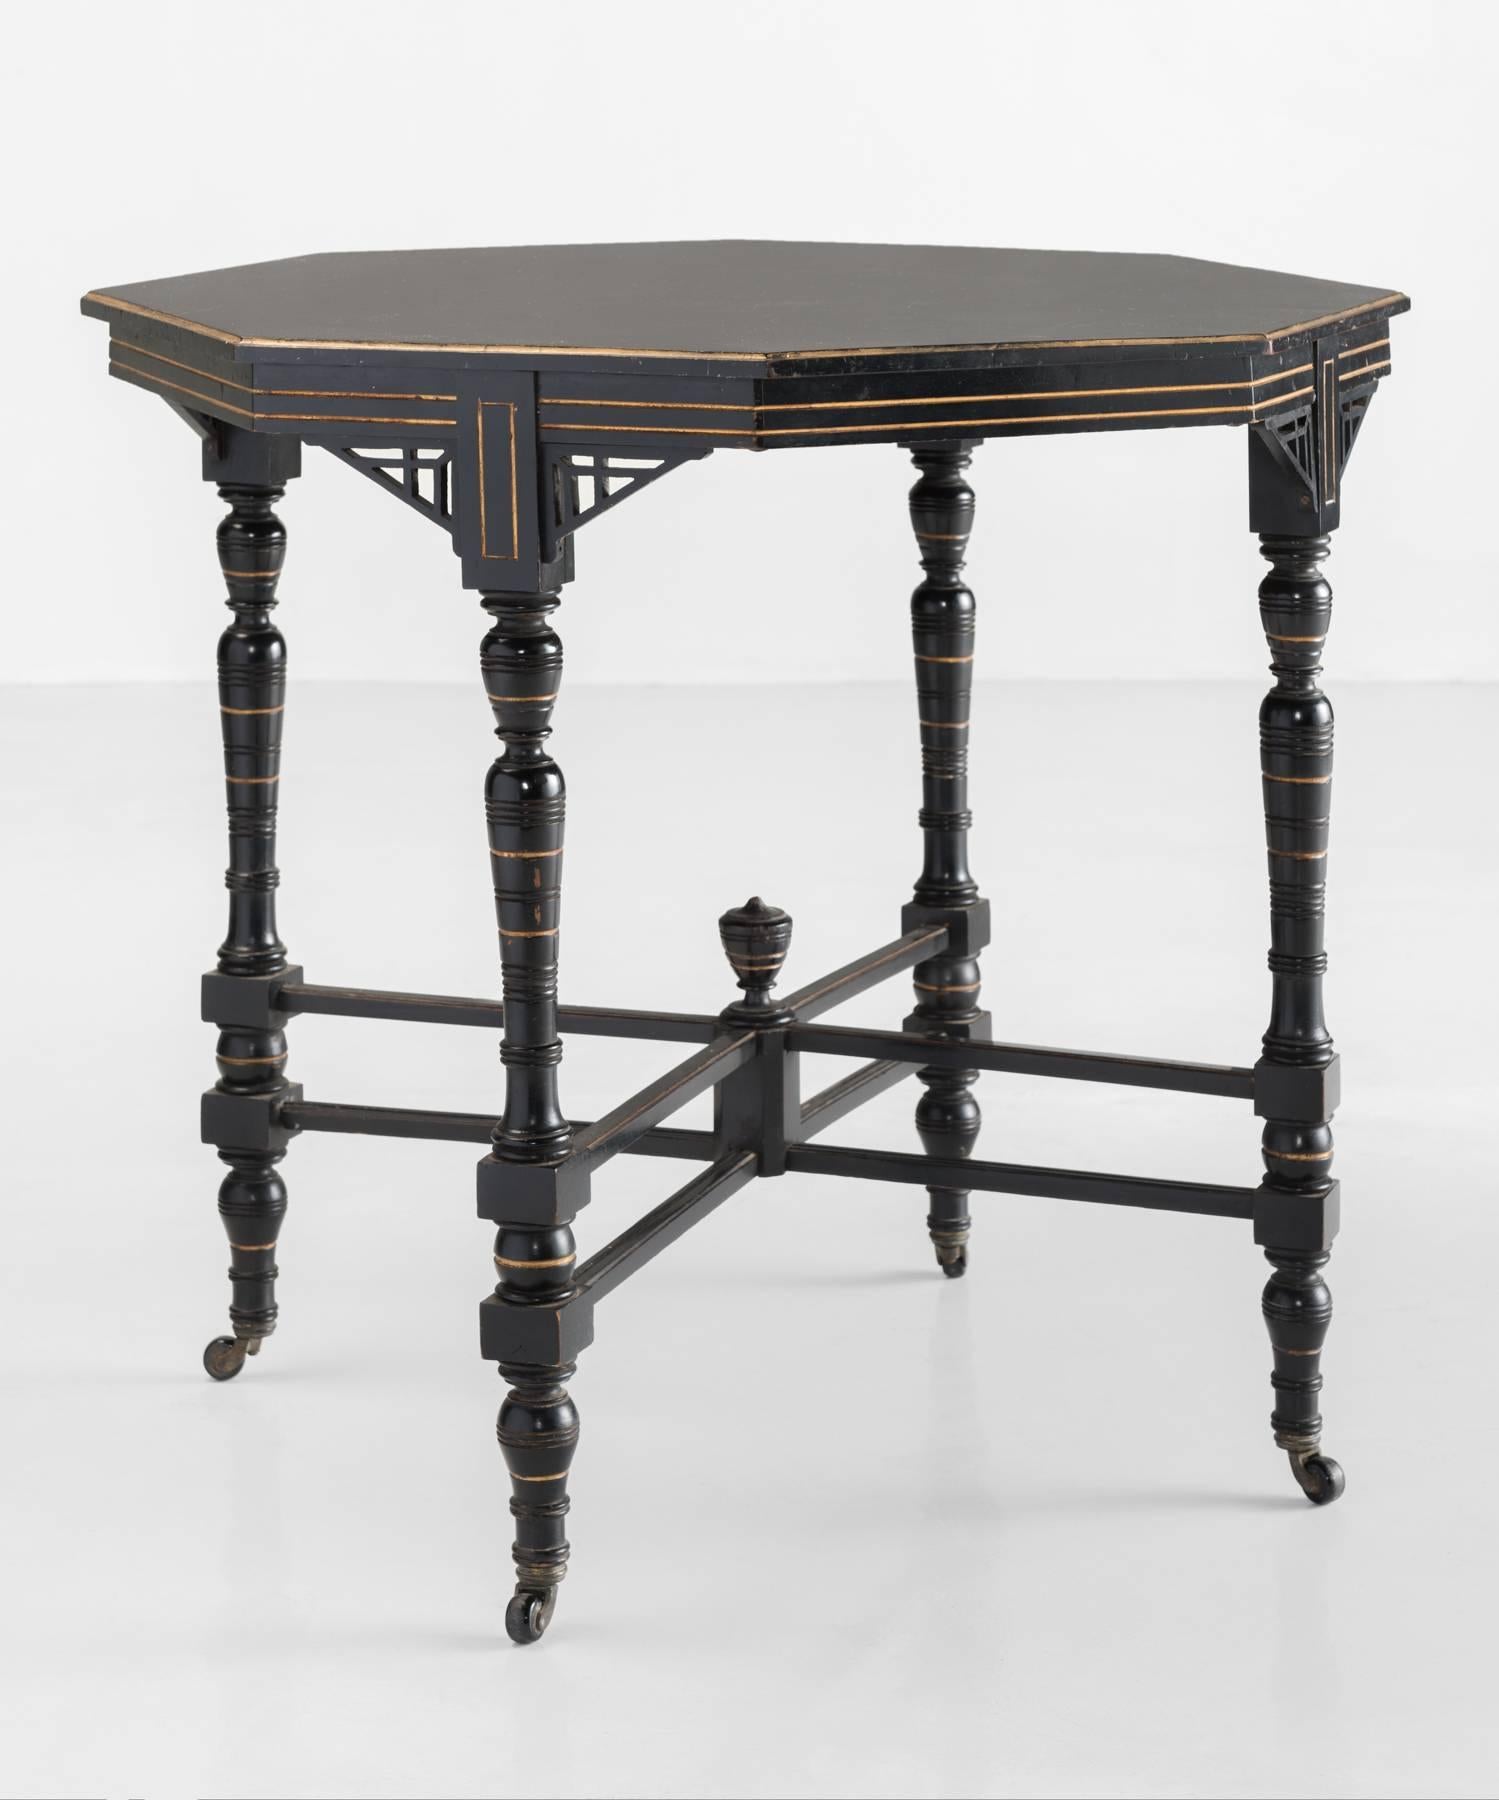 Aesthetic Movement ornate side table, circa 1880.

Ebonized table with gilded detailing on original castors.